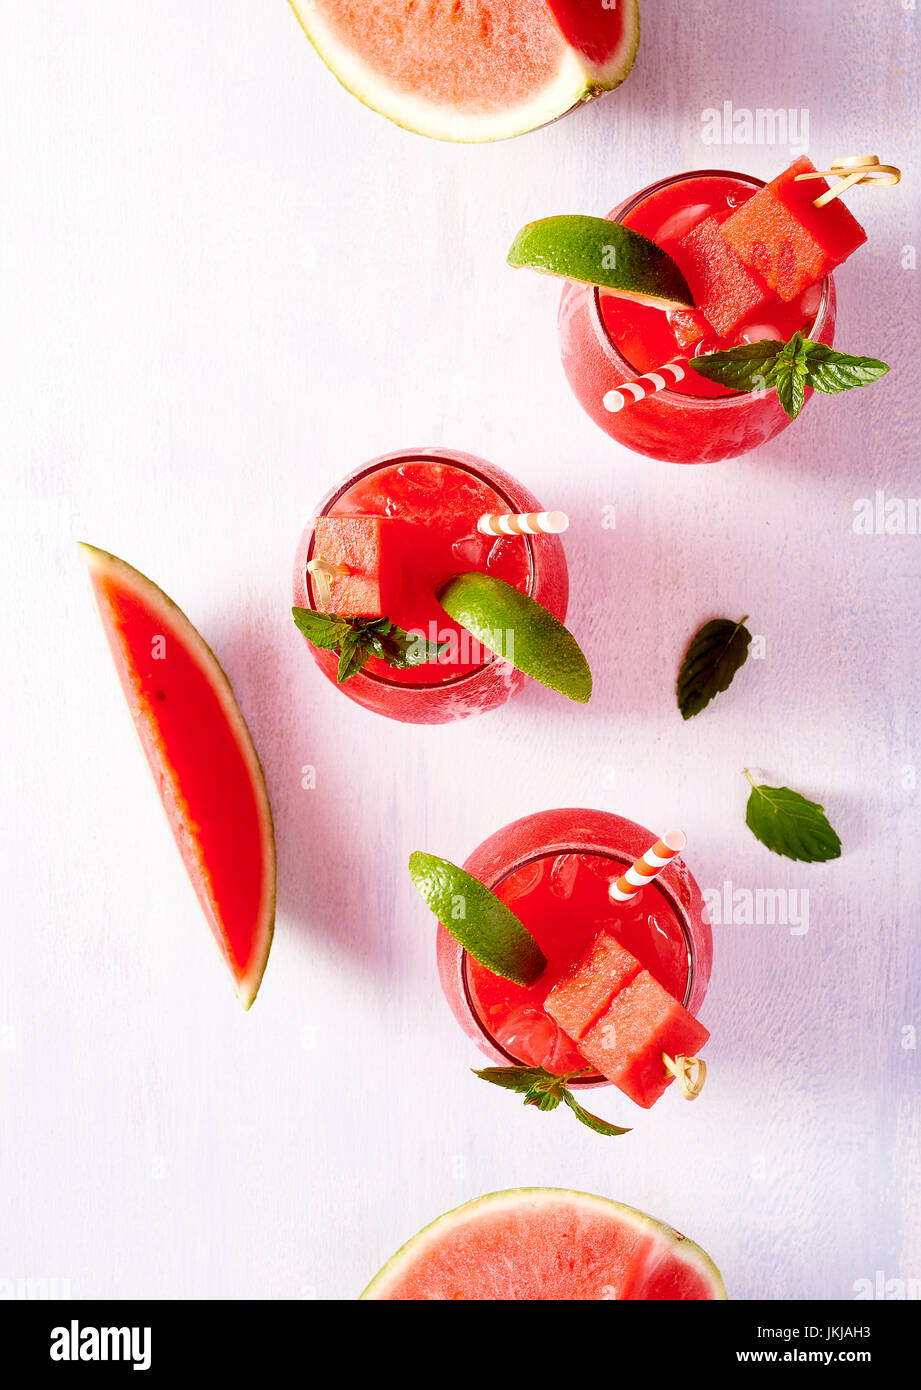 Watermelon cocktails ready for summer drinking Stock Photo